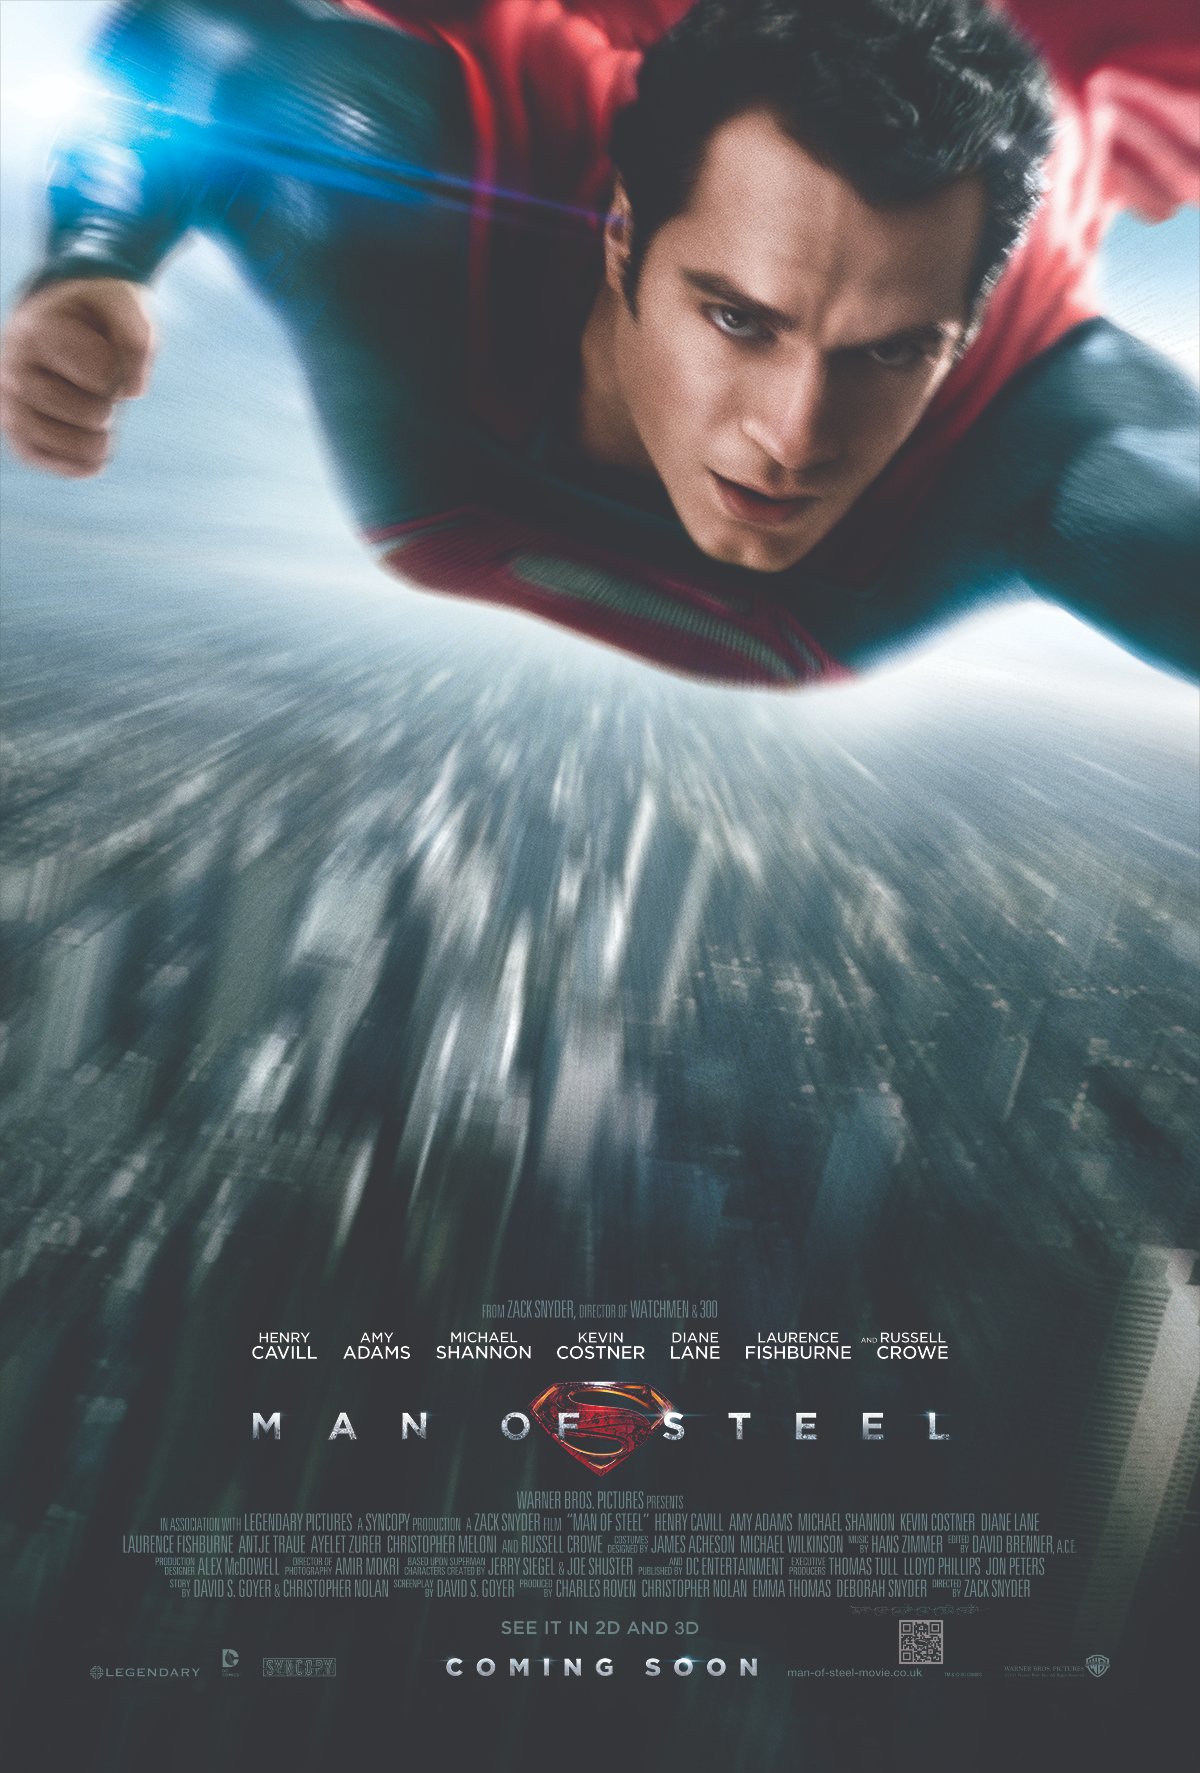 WB Releases New MAN OF STEEL Poster on Twitter